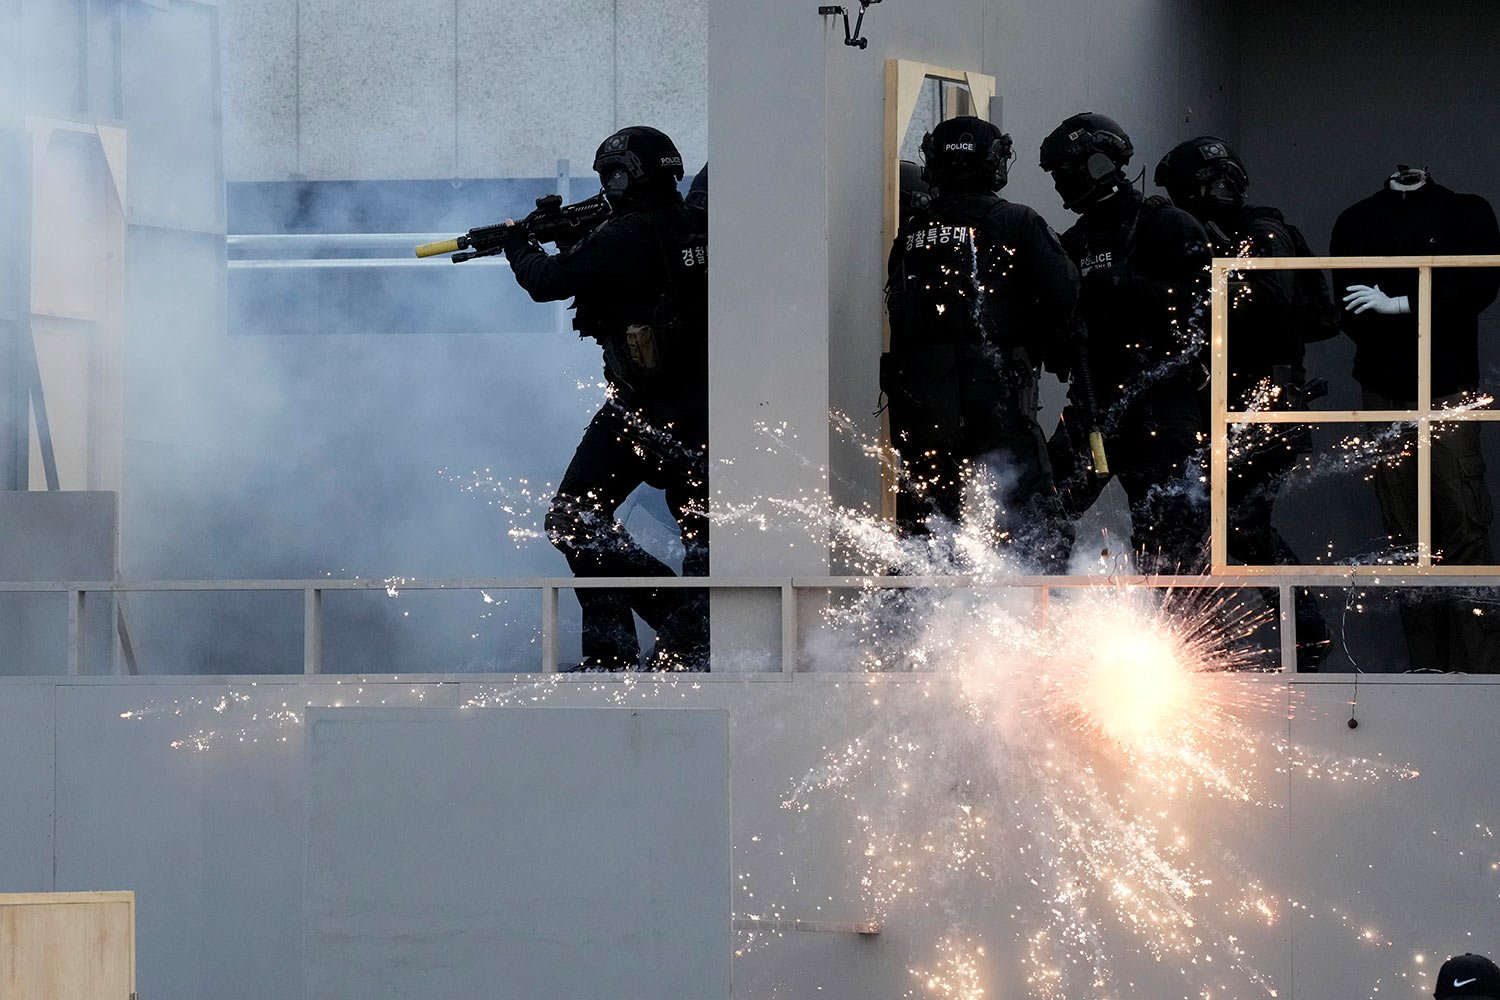  Members of the South Korean Police Special Operation Unit participate during national comprehensive counter-terrorism training in Goyang, South Korea, Thursday, Oct. 27, 2022.  (AP Photo/Lee Jin-man) 